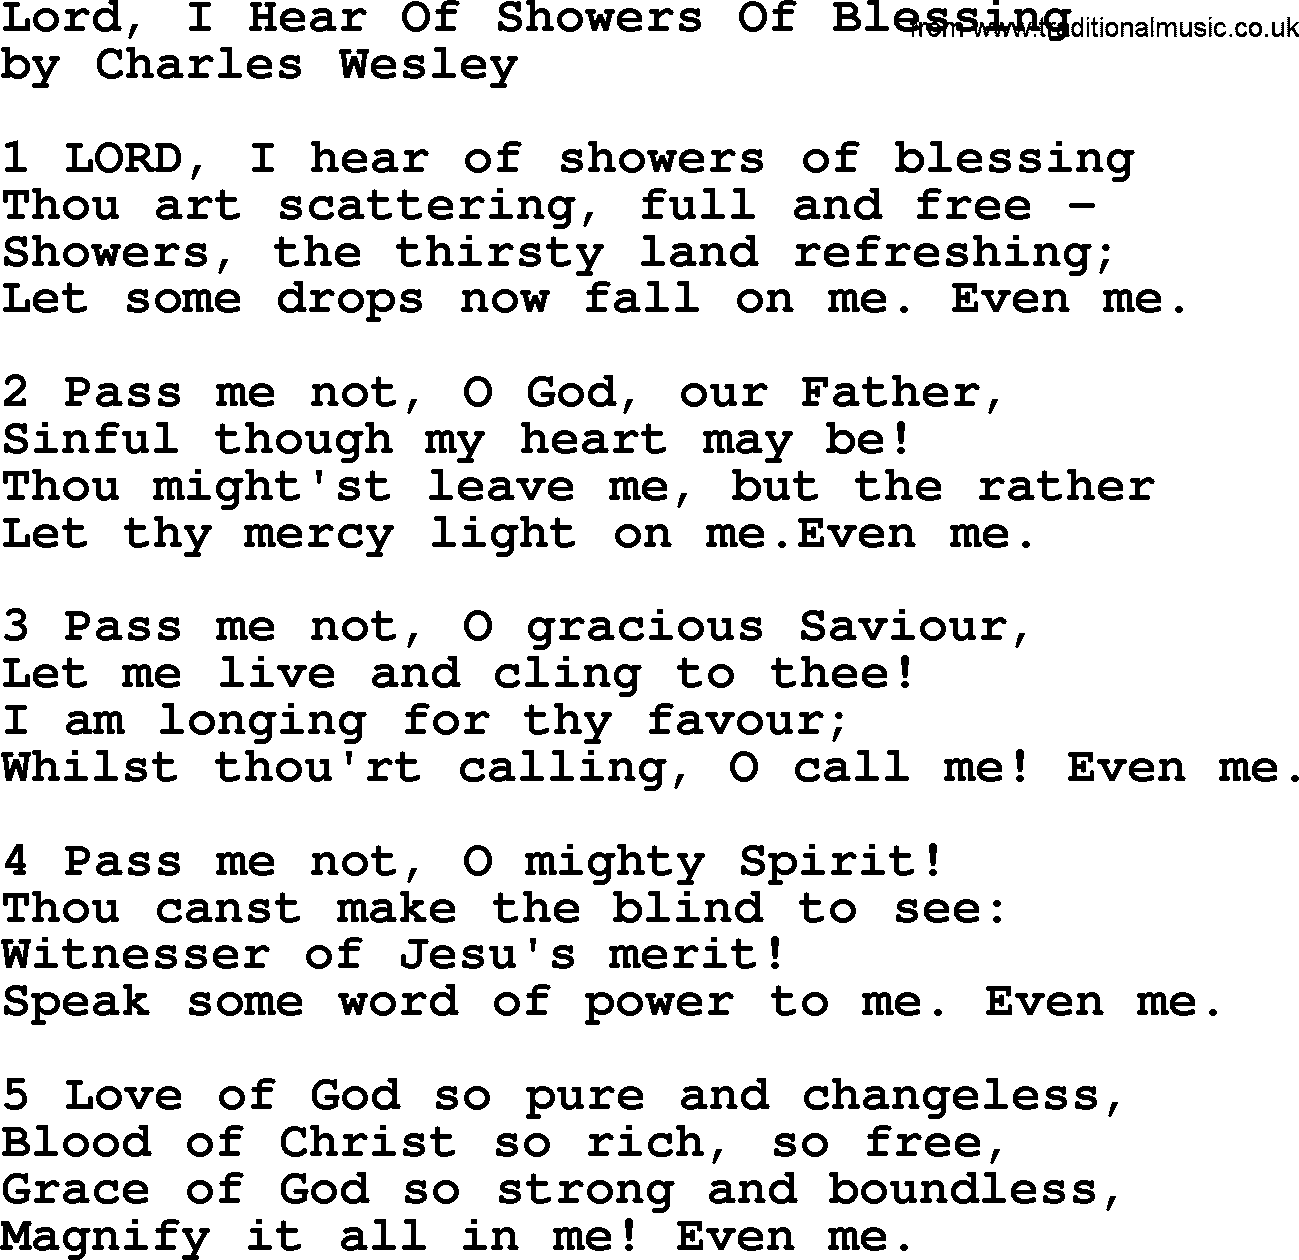 Charles Wesley hymn: Lord, I Hear Of Showers Of Blessing, lyrics